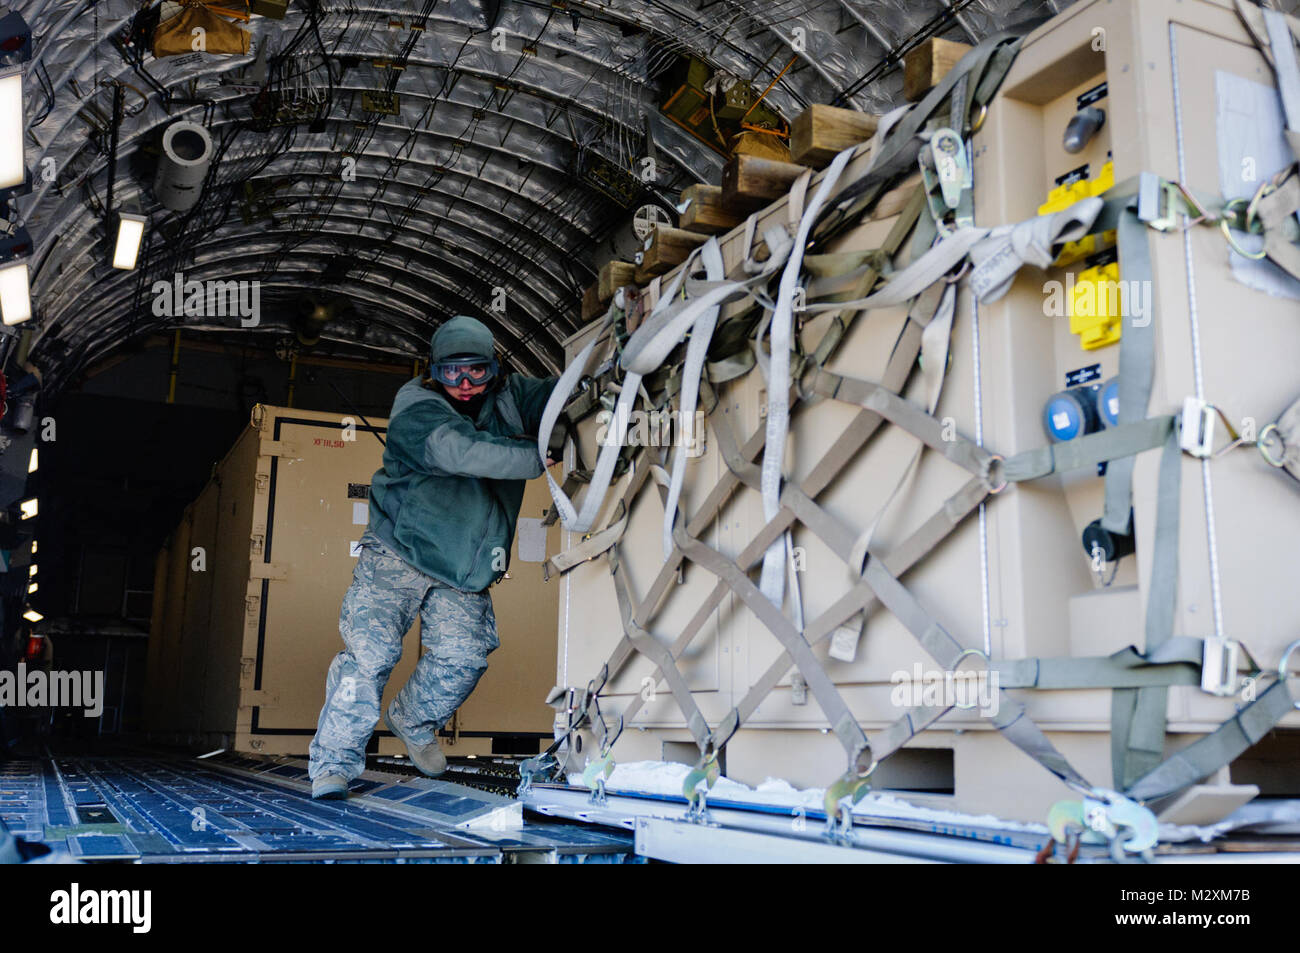 Staff Sgt. Brian Leach, aerial port ramp supervisor for the Kentucky Air National Guard’s 123rd Contingency Response Group, pushes a pallet of cargo from a C-17 during Exercise Eagle Flag at Joint Base McGuire-Dix-Lakehurst, N.J., on March 28, 2012. The unit, from Louisville, Ky., joined forces with the U.S. Army’s 690th Rapid Port Opening Element from Ft. Eustis, Va., to establish a Joint Task Force Rapid-Port Opening through March 30. (U.S. Air Force photo by Master Sgt. Phil Speck) Exercise Eagle Flag by The National Guard Stock Photo